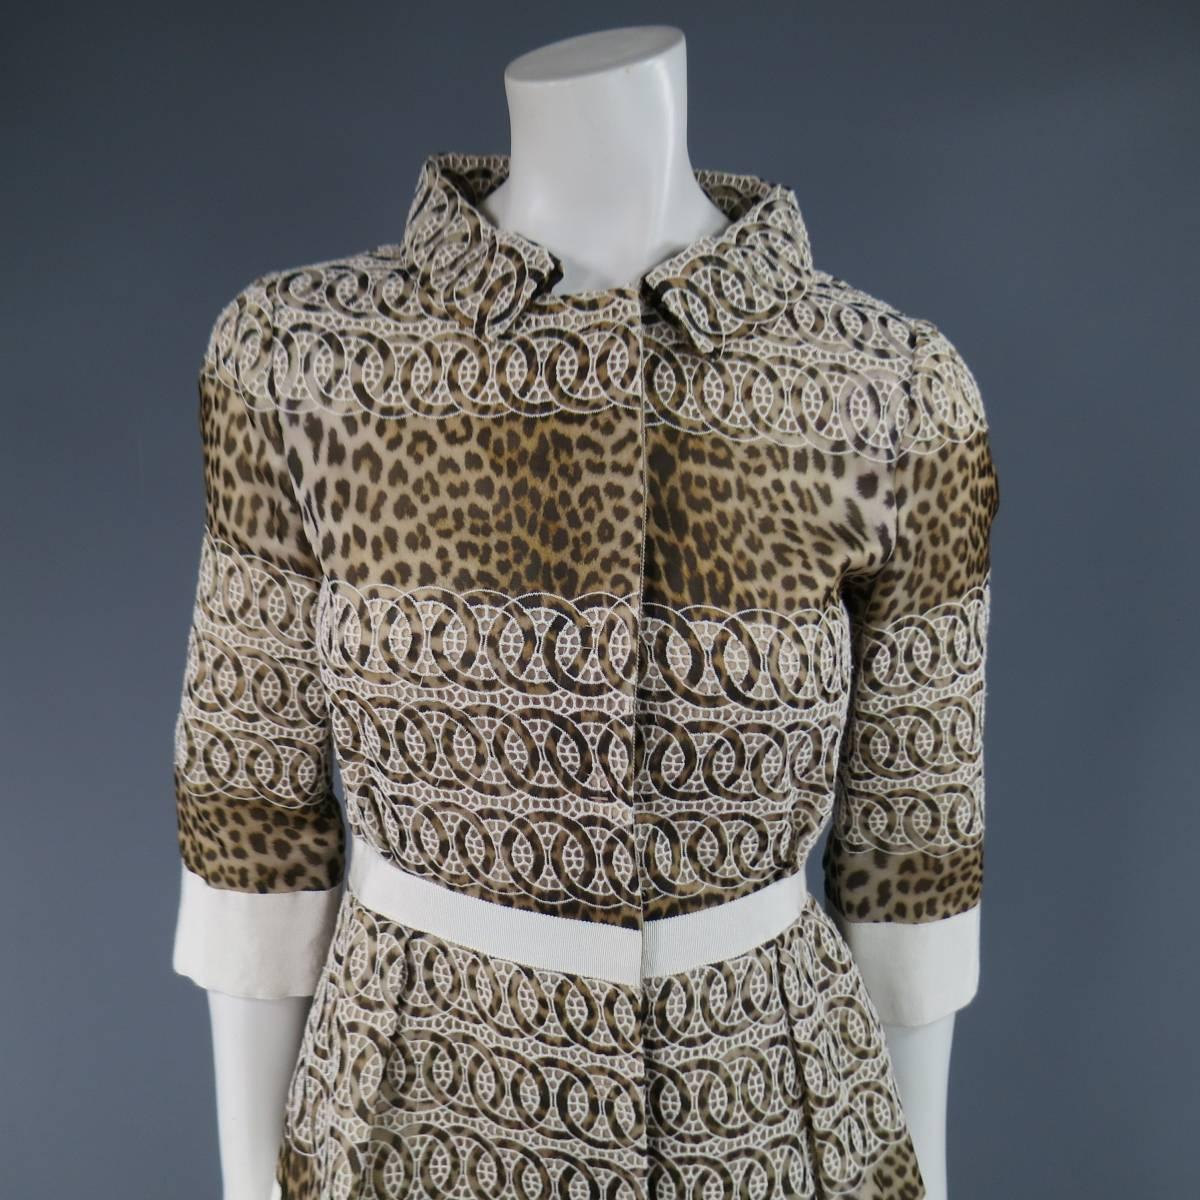 This stunning GIAMBATTISTA VALLI coat dress comes in a light taupe beige cheetah leopard print silk with panel stripes of embroidery and features light beige ribbon trim, pointed, embroidered collar, 3/4 sleeves, hidden placket snap closure, and